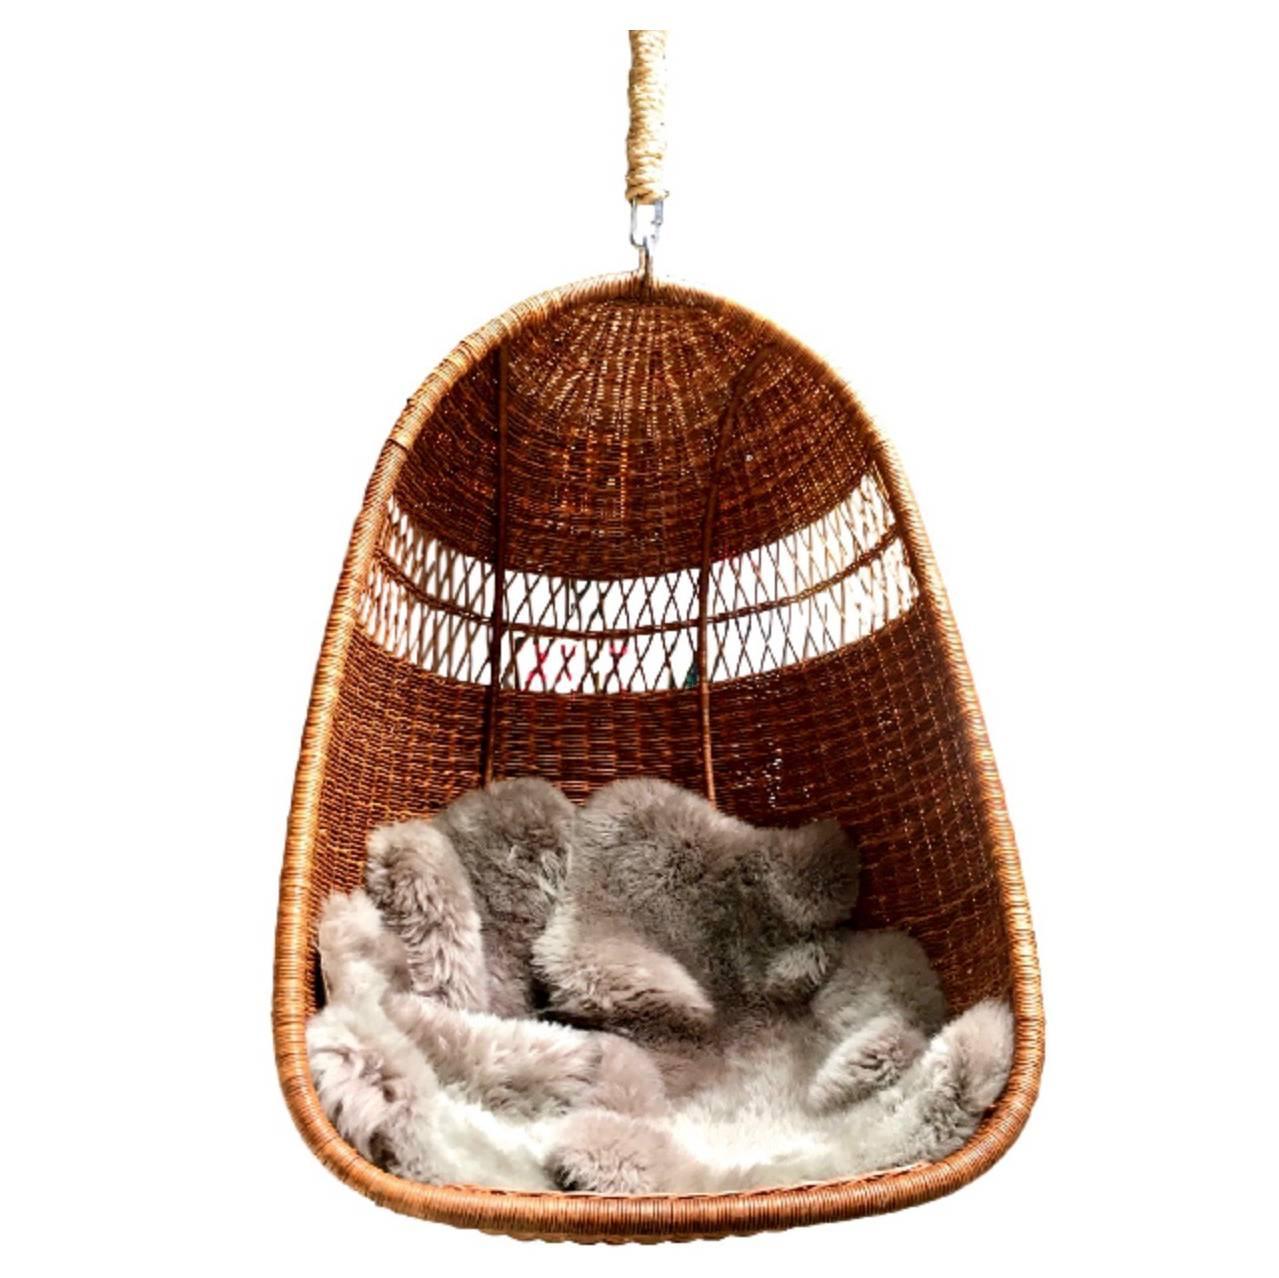 Rattan and Wicker Hanging Chair